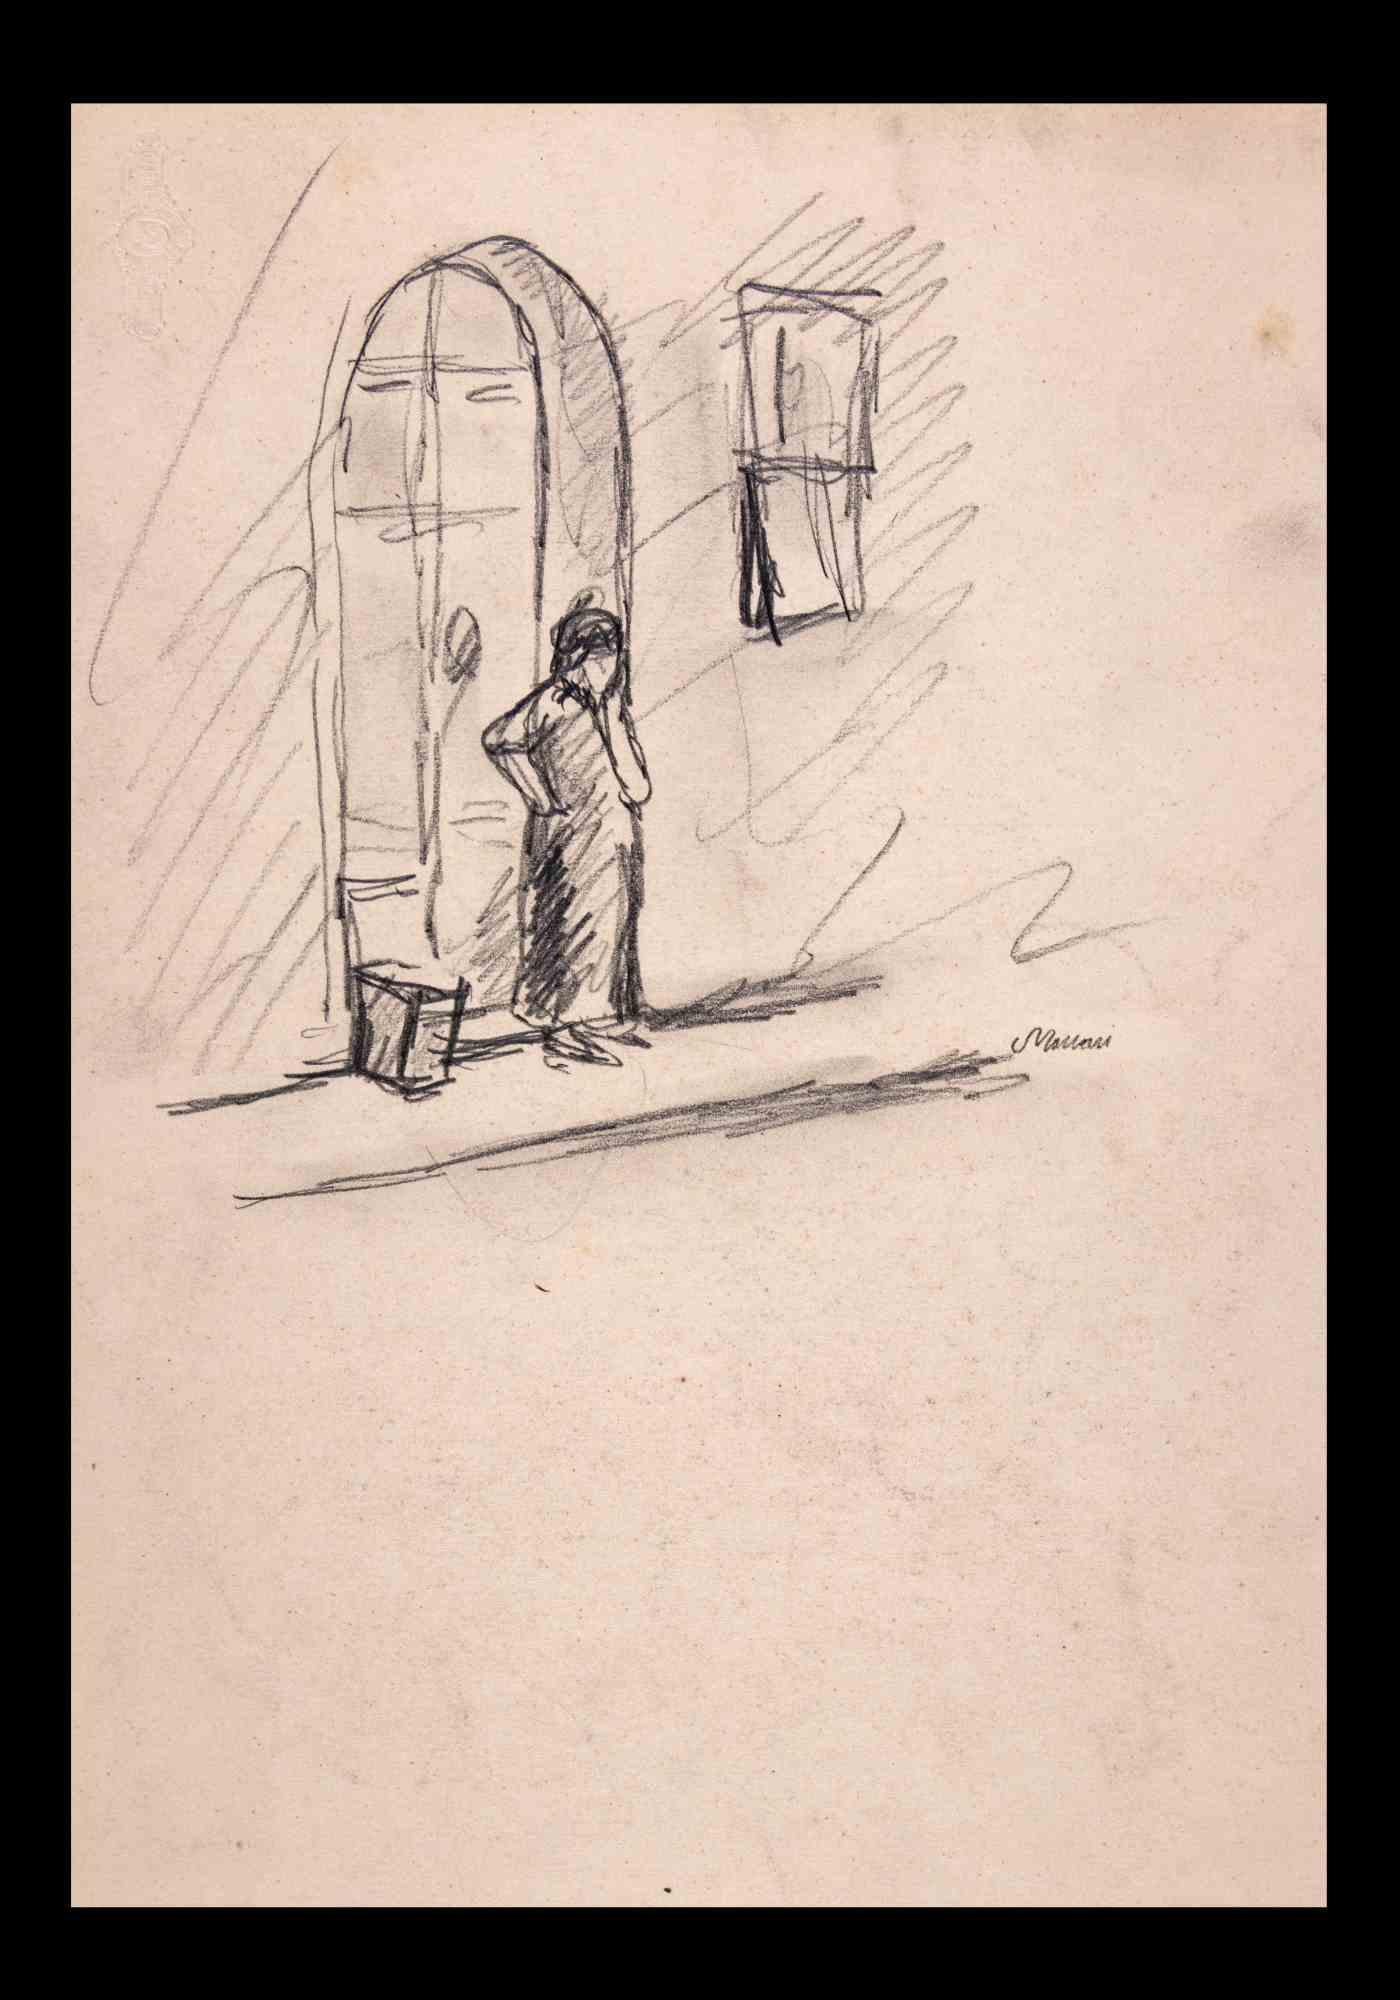 Tuscany on the Doorstep is a Pencil Drawing realized by Mino Maccari  (1924-1989) in 1950s.

Hand signed and titled on the lower margin.

Good condition on a yellowed cardboard.

Mino Maccari (Siena, 1924-Rome, June 16, 1989) was an Italian writer,